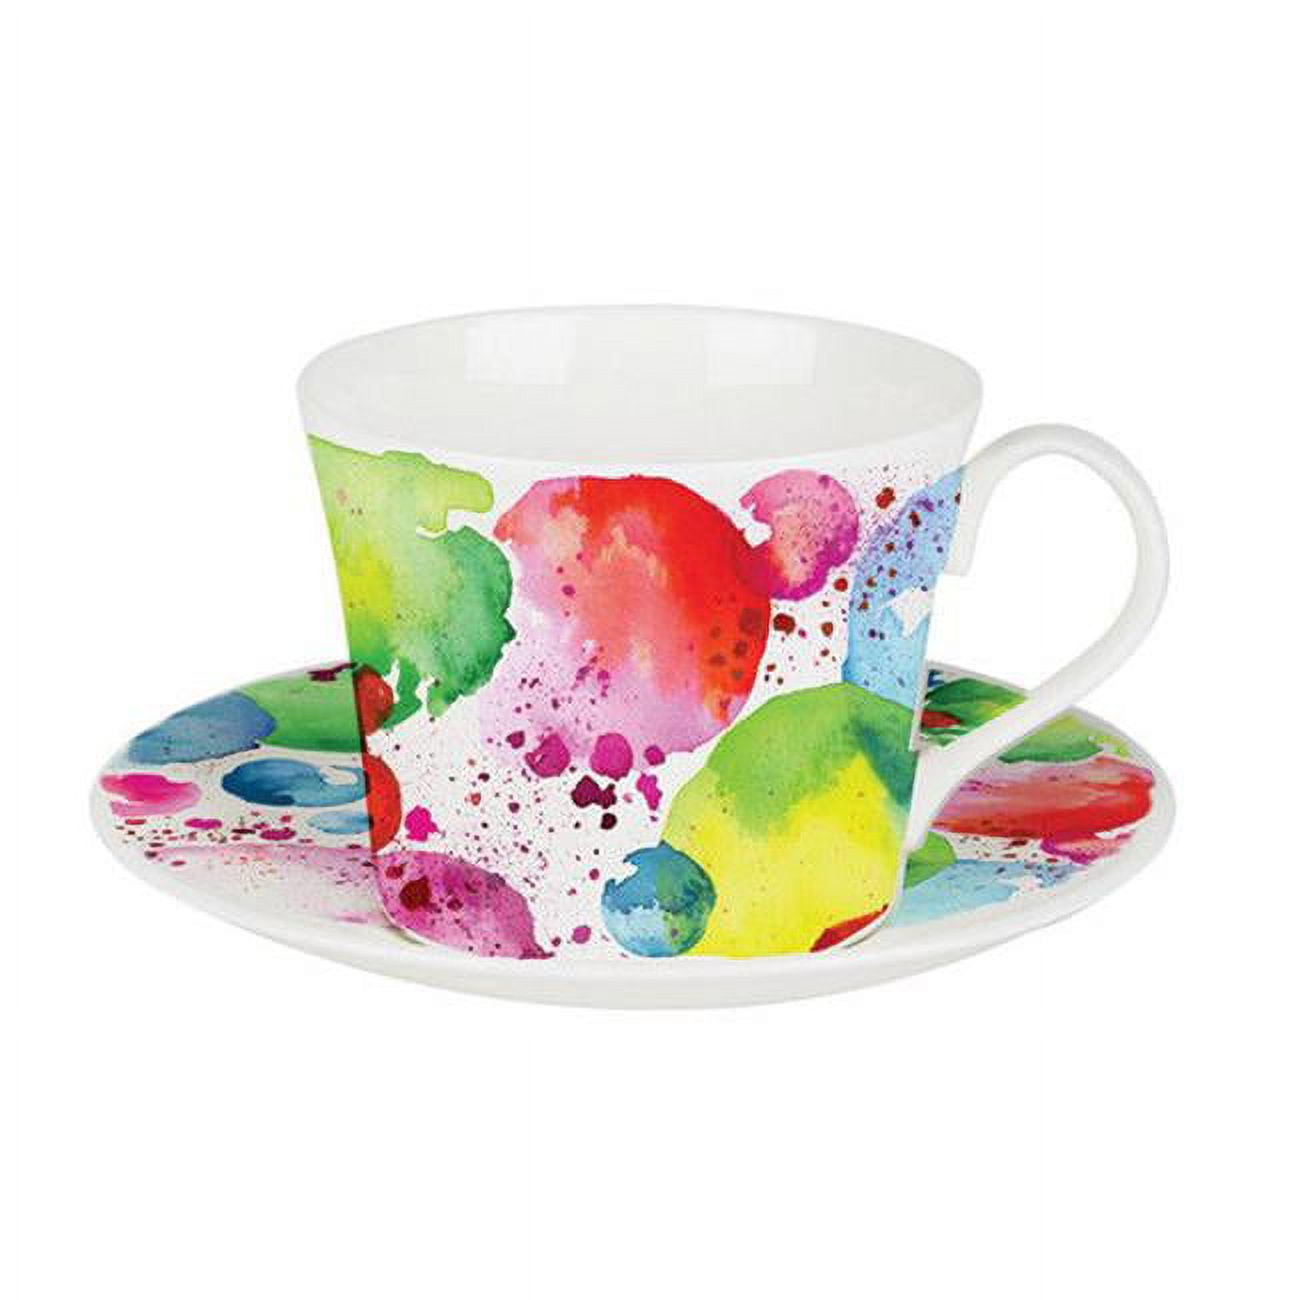 Er28141 105 Mm The Planets Breakfast Cups & Saucers - Set Of 2